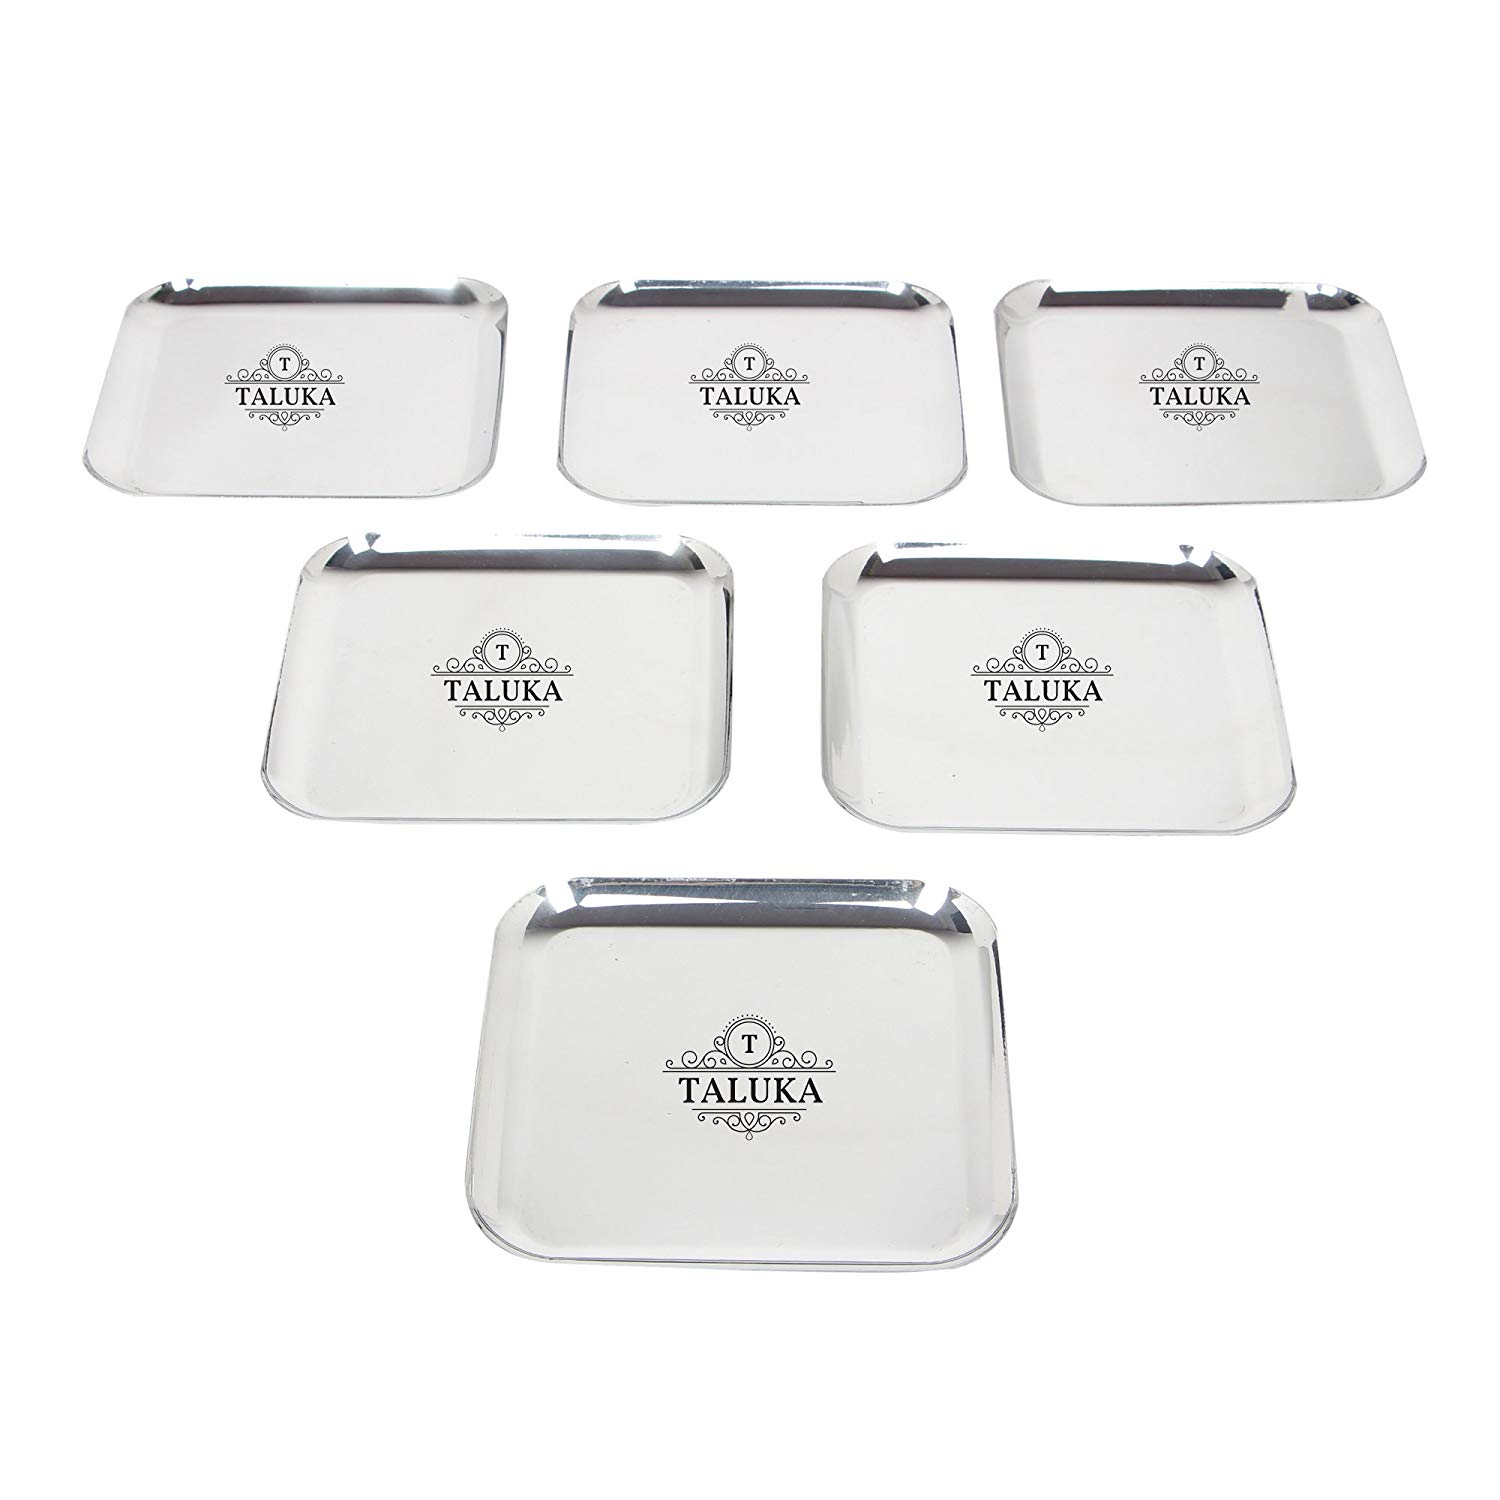 Stainless Steel Sqaure Dinner Serving Plate For Restaurant Hotel Home KItchen Ware